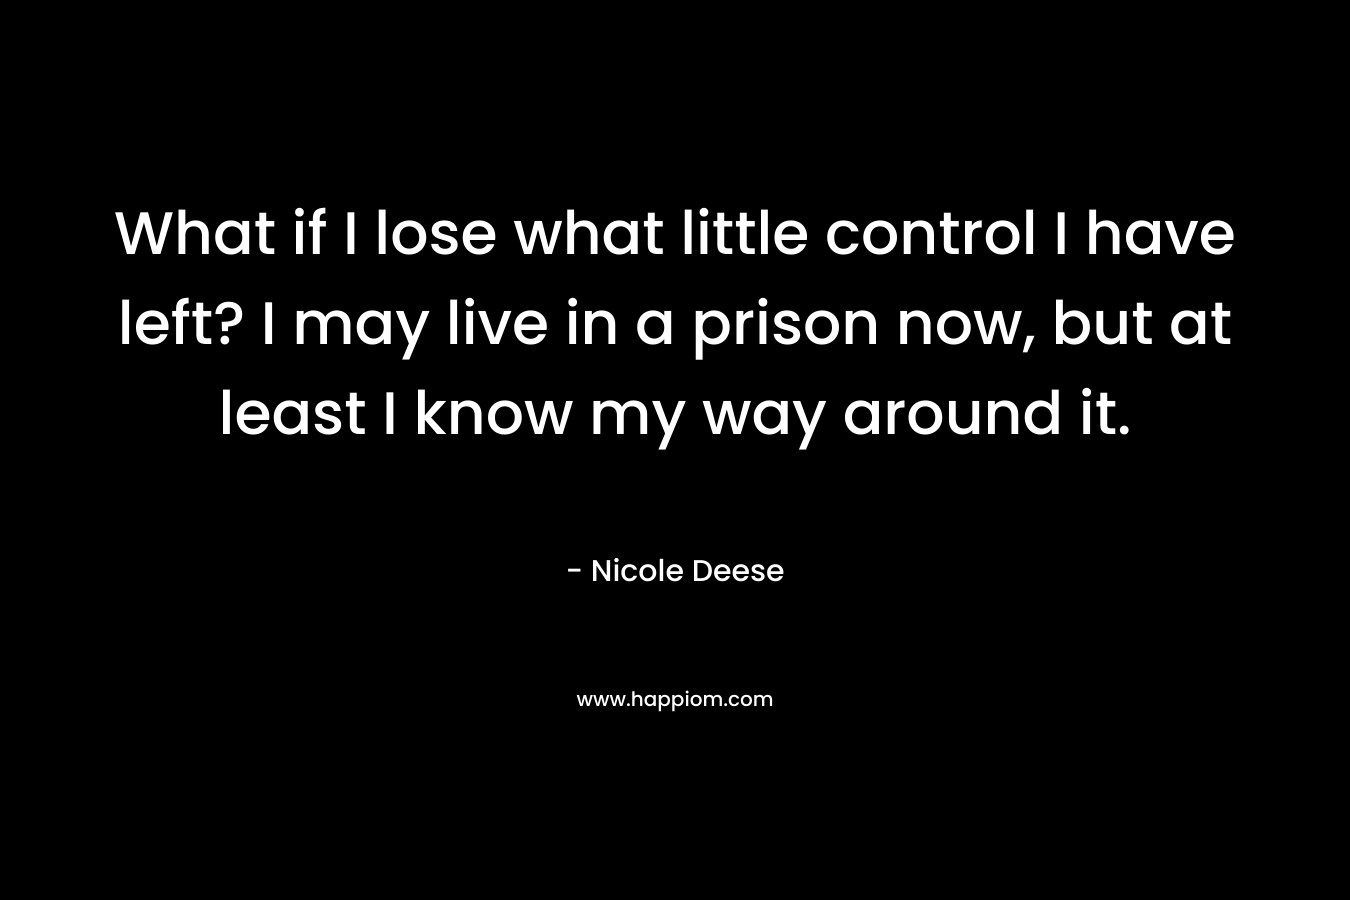 What if I lose what little control I have left? I may live in a prison now, but at least I know my way around it.